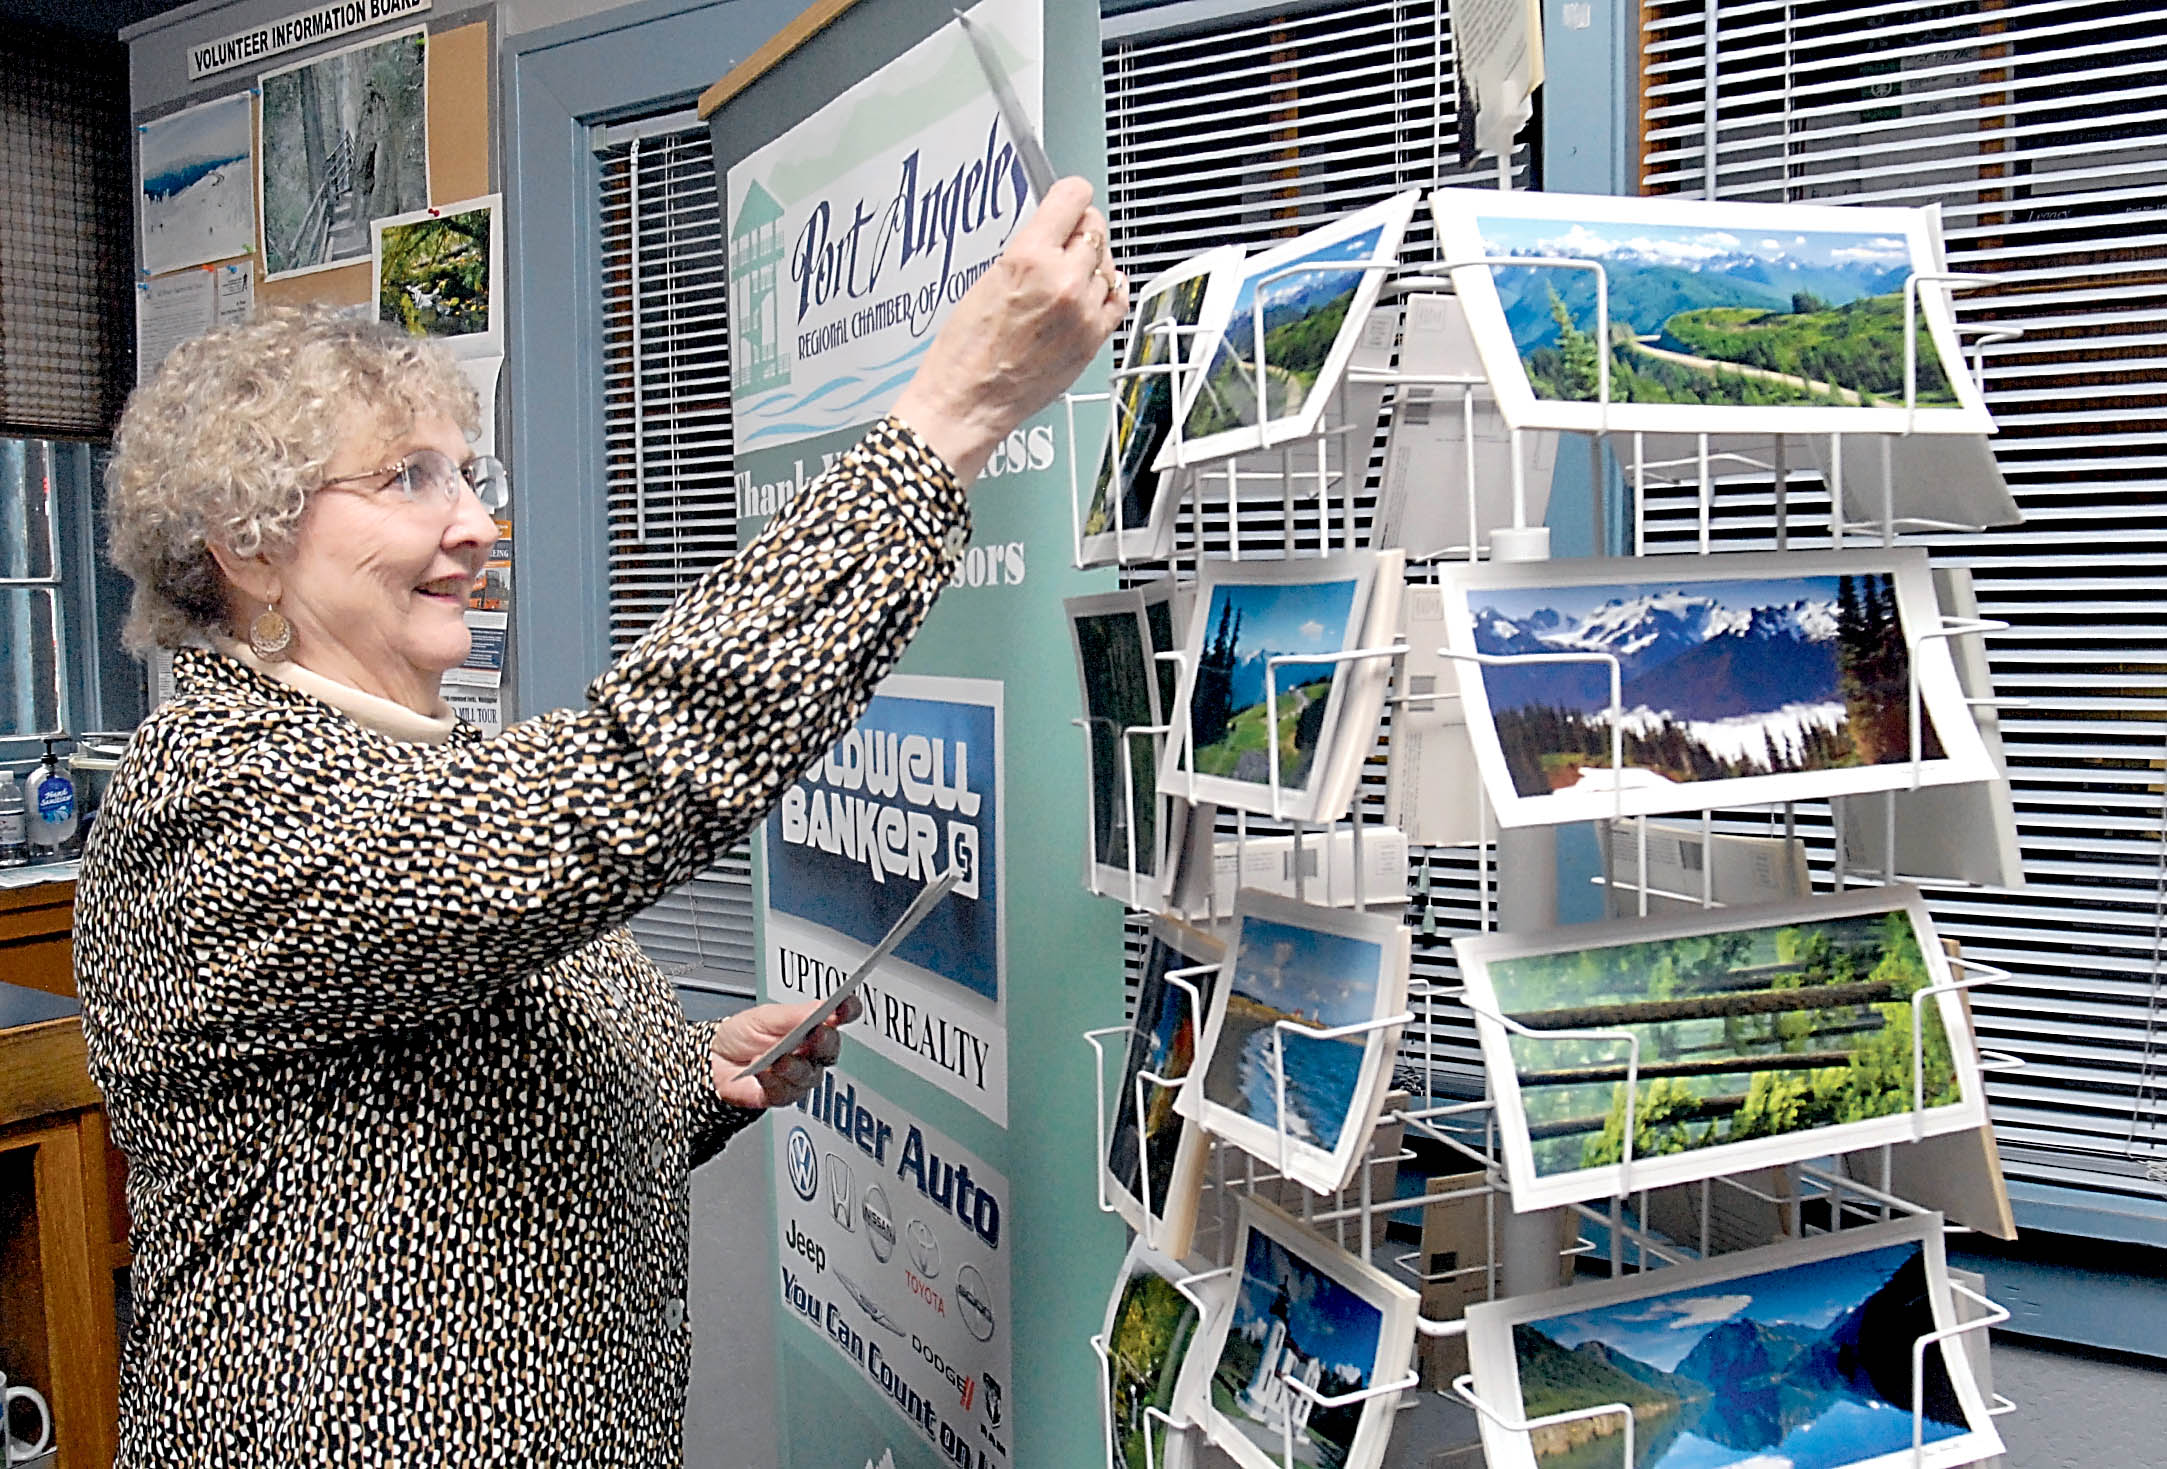 Volunteer Jo-Anne Larson of Port Angeles restocks postcards at the Port Angeles Regional Chamber of Commerce visitor center on the Port Angeles waterfront. —Photo by Keith Thorpe/Peninsula Daily News